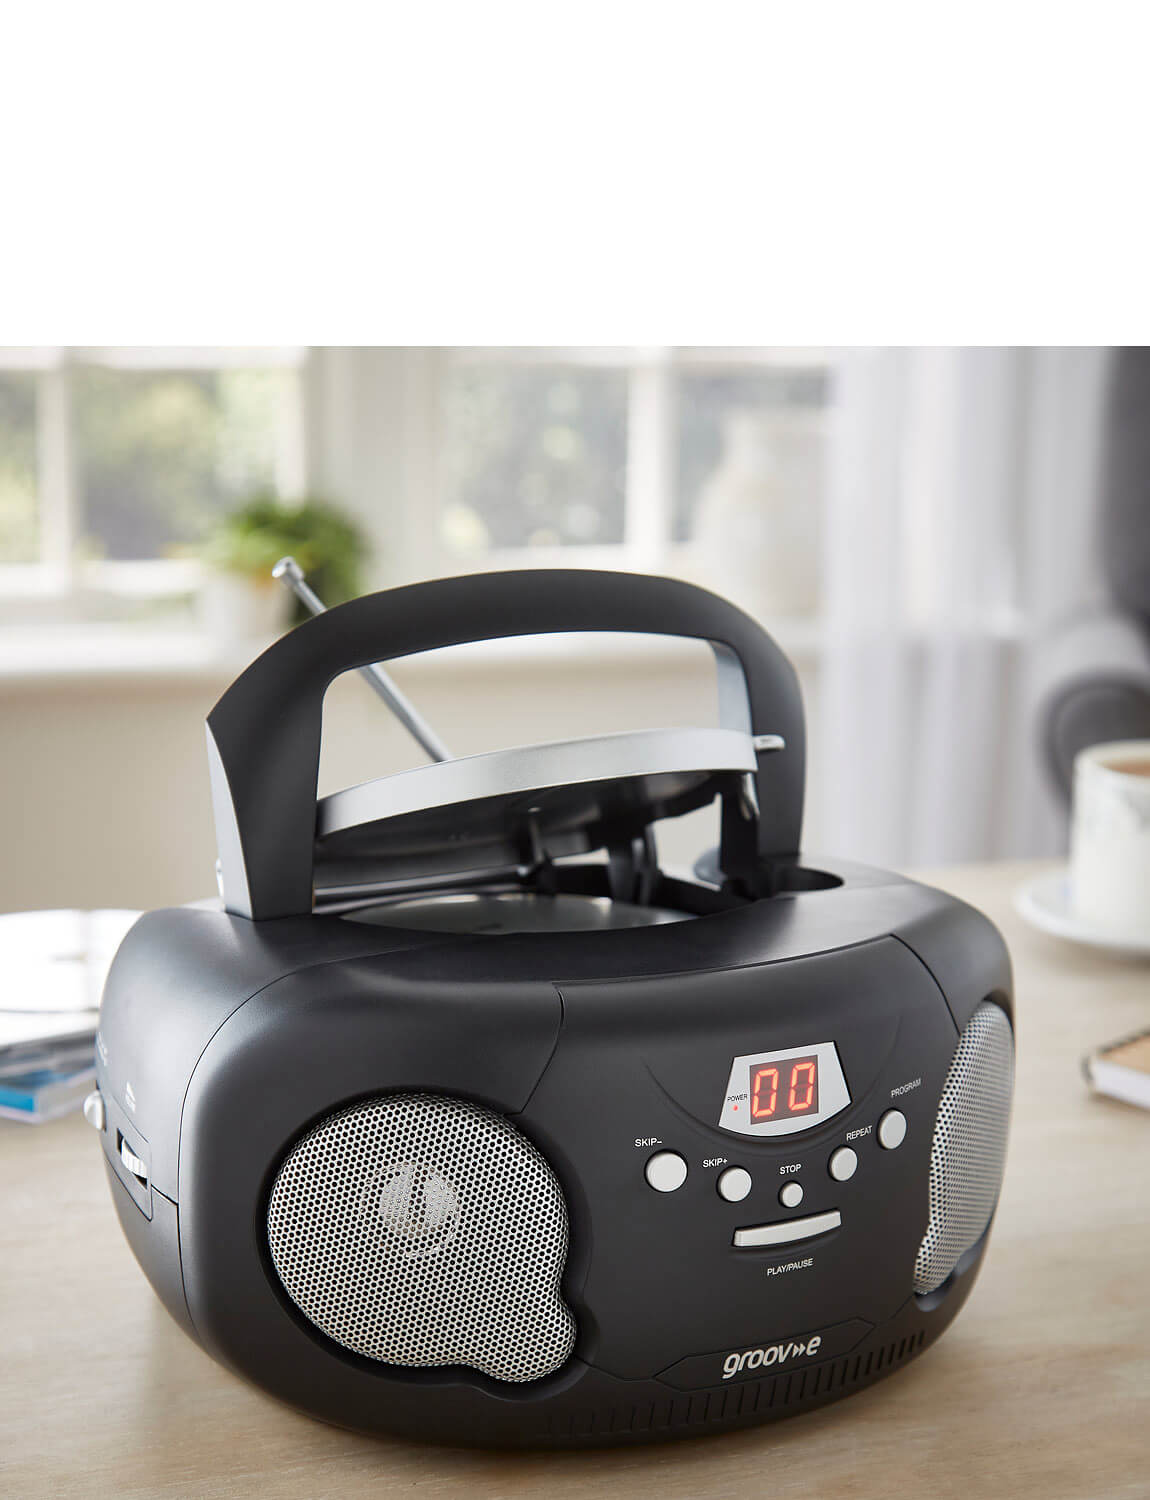 groove radio cd player  by  Groov-e